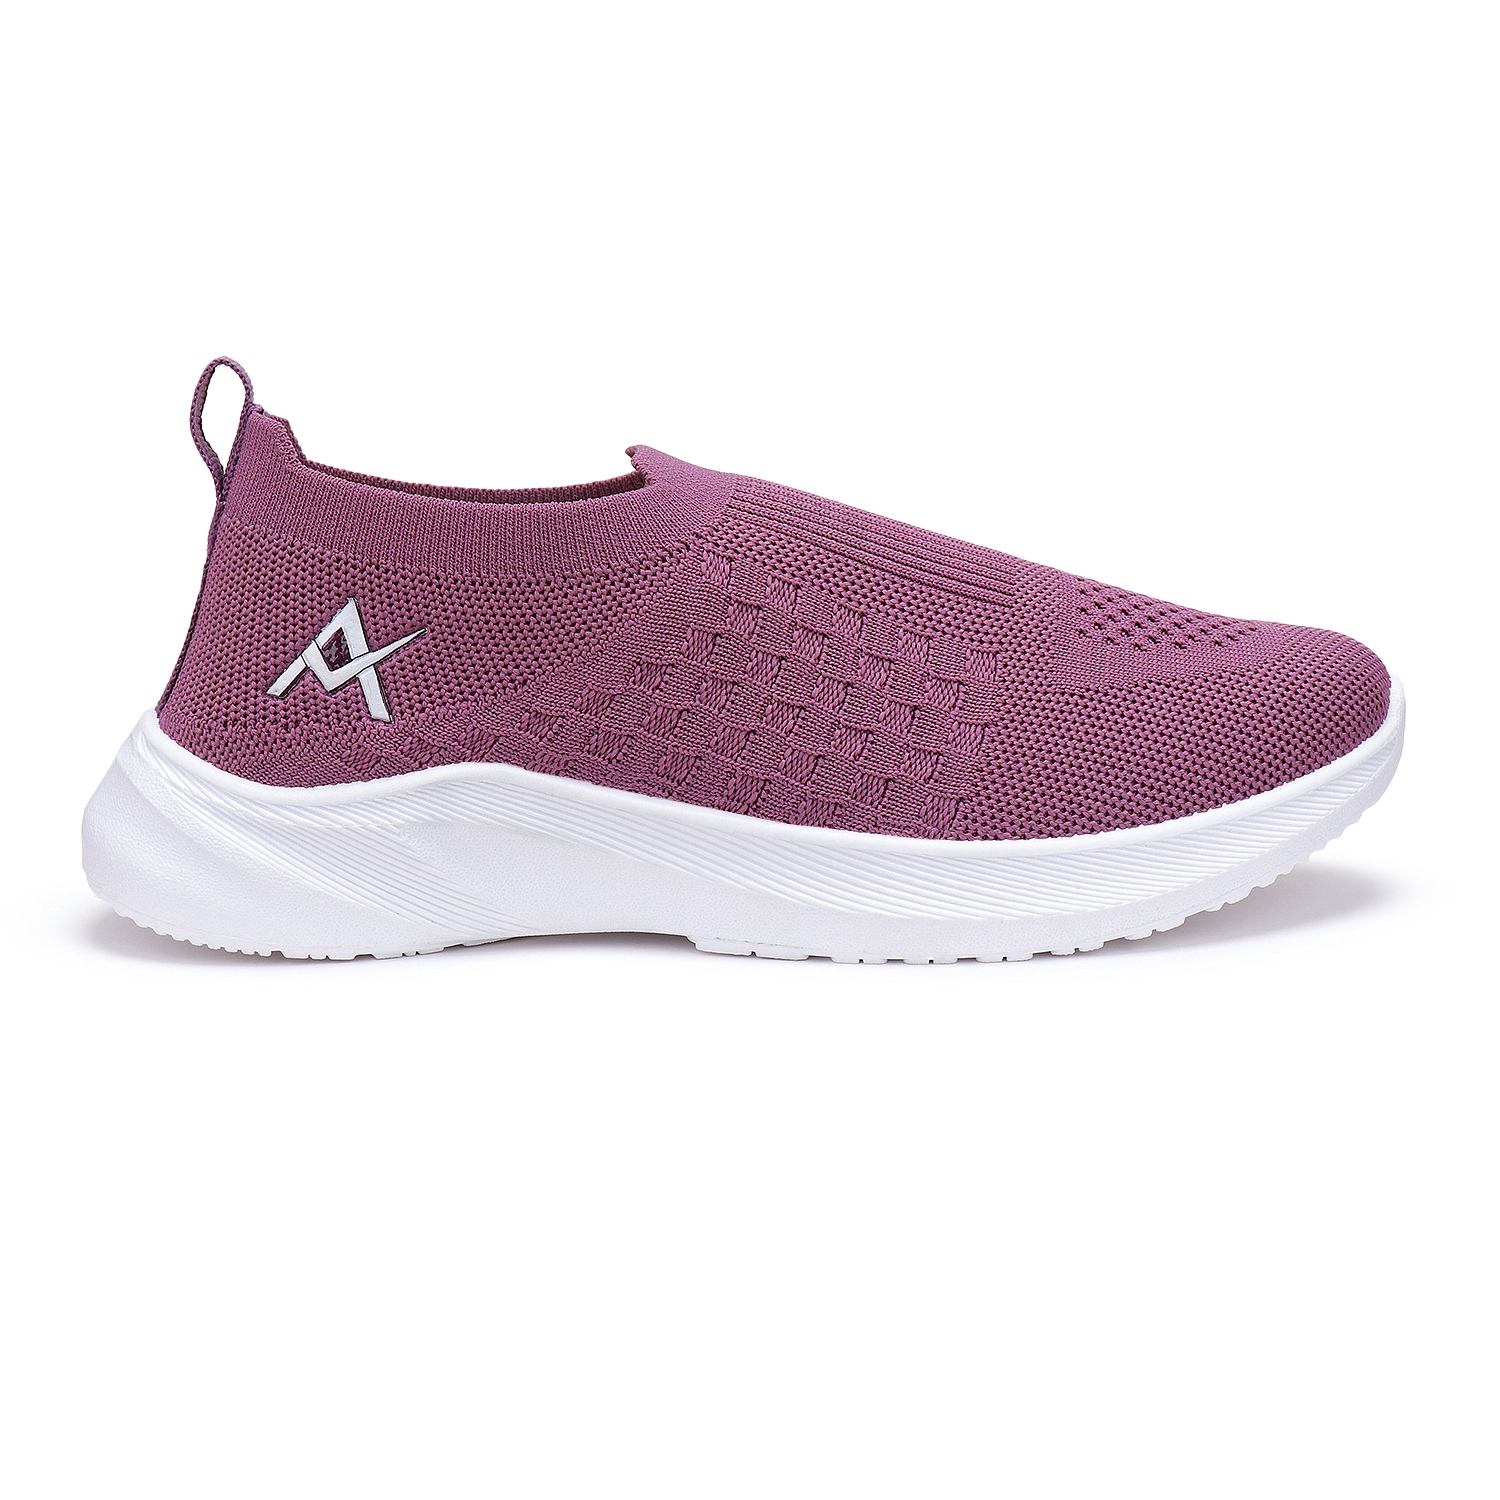 Women's ONION PINK Casual Slip-ons